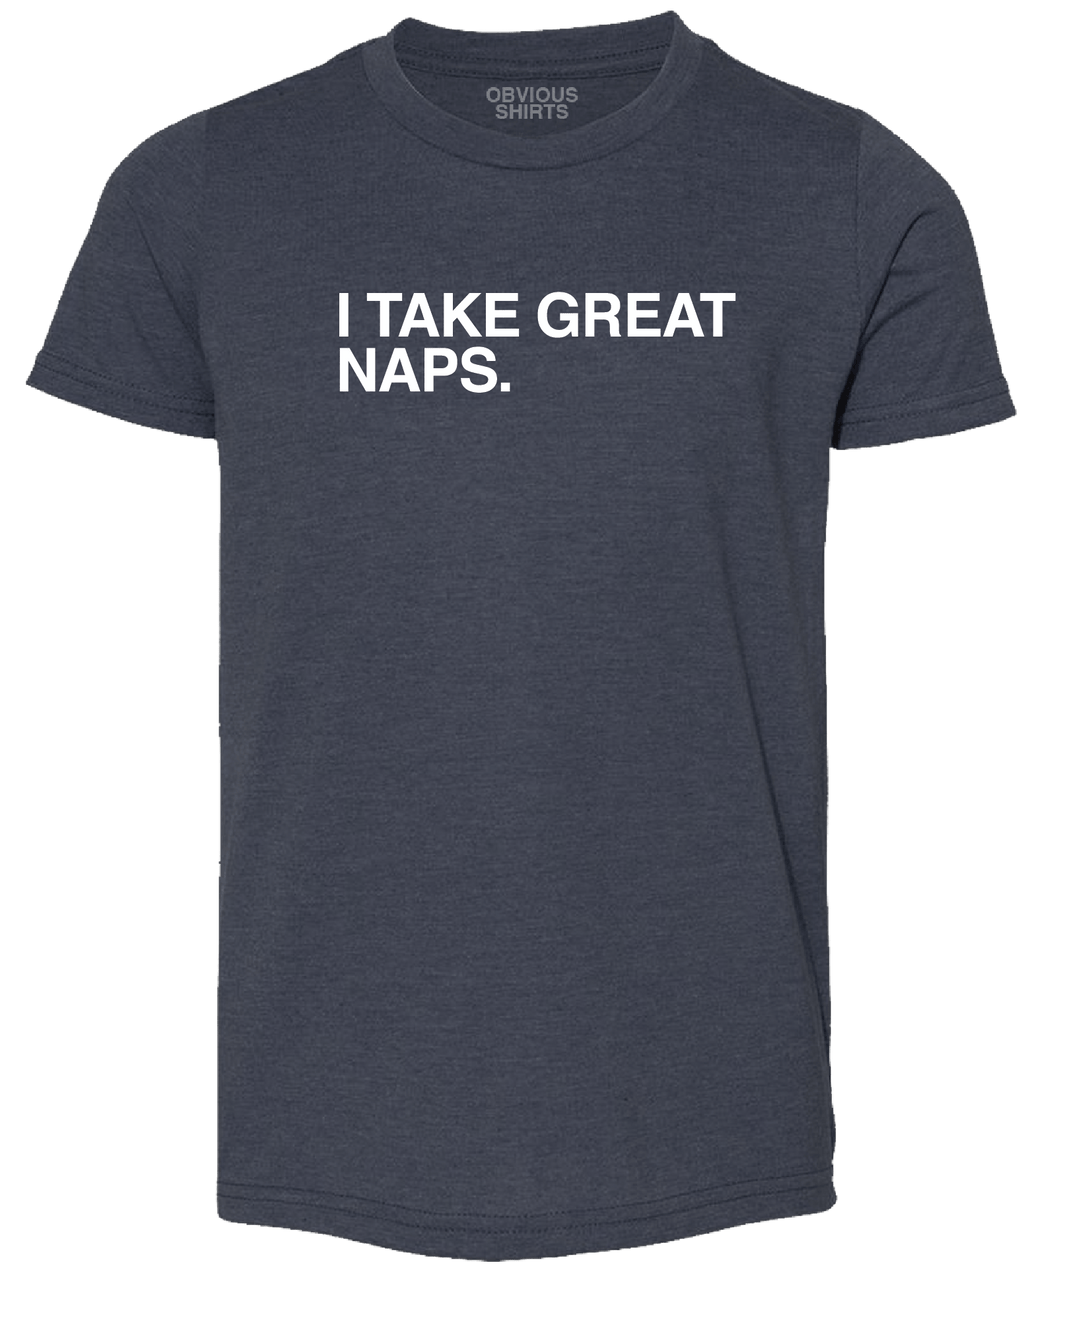 I TAKE GREAT NAPS. (YOUTH) - OBVIOUS SHIRTS